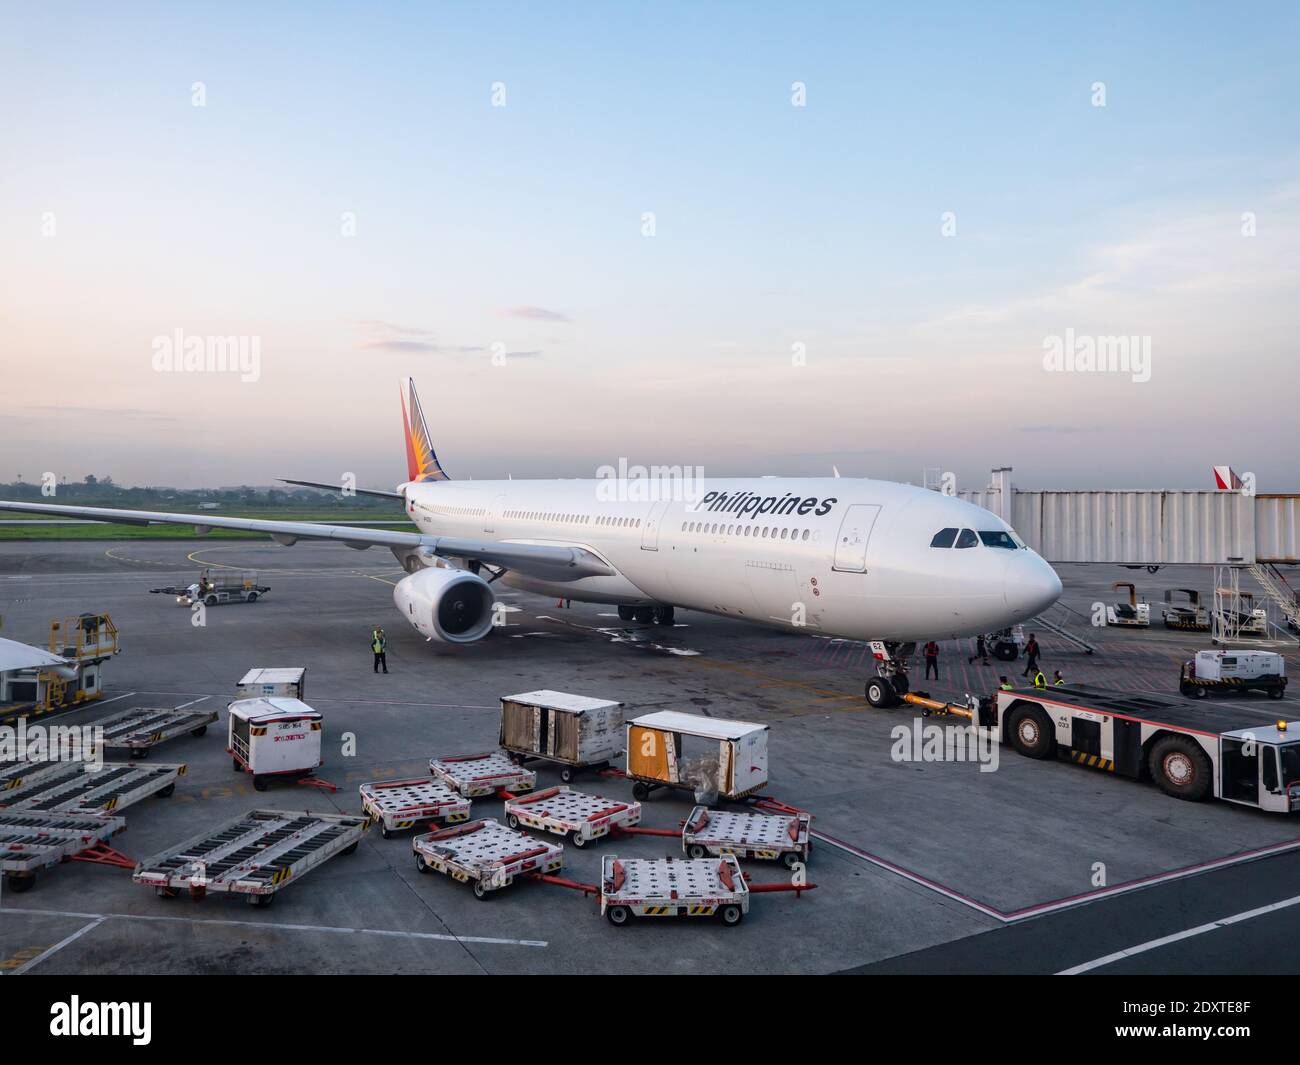 Philippine Airlines Airbus A330 being readied for departure early in the morning at Terminal 2 of Ninoy Aquino International Airport in Manila, Philip Stock Photo